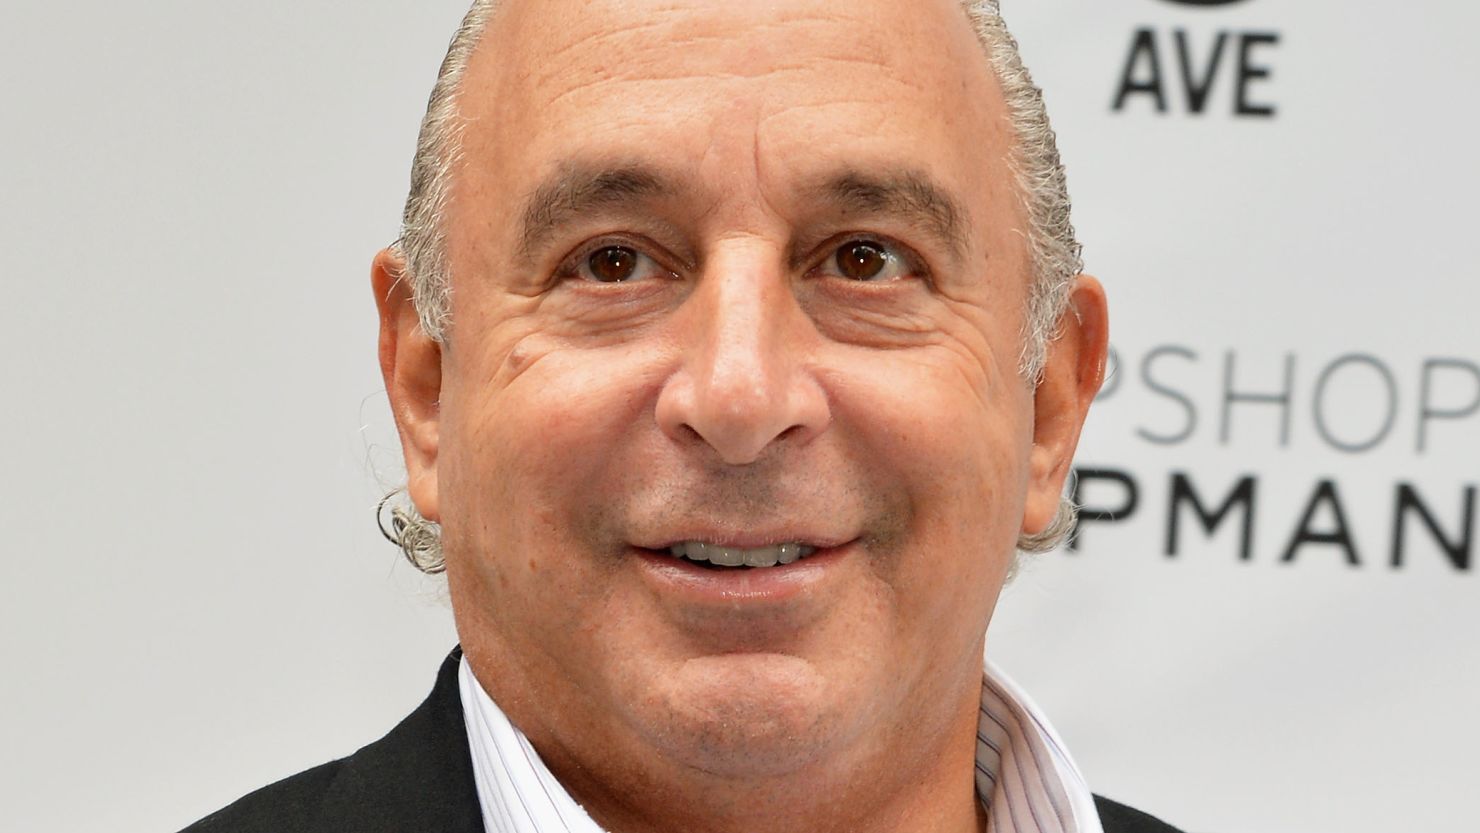 Philip Green attends the opening of Topshop Topman in New York City in 2014.